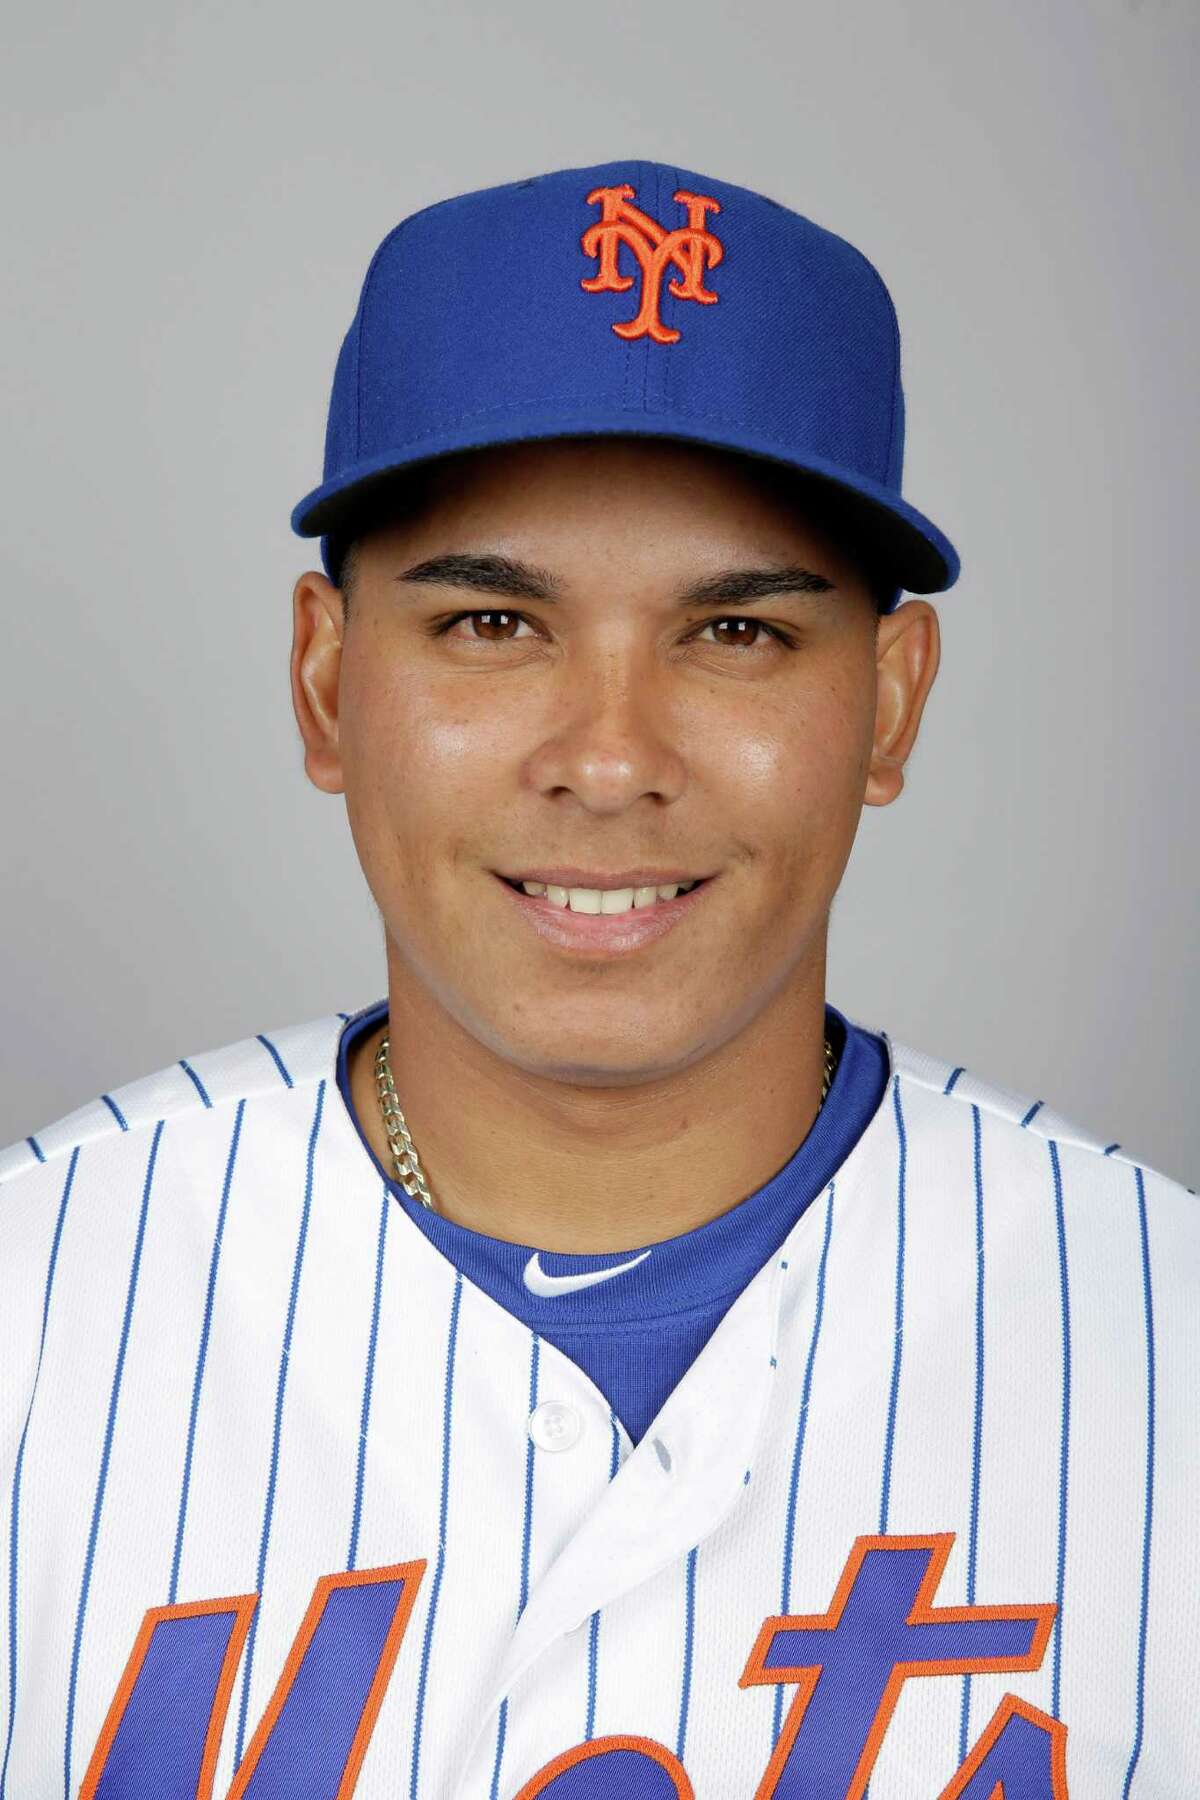 This is a 2016 photo of Ruben Tejada of the New York Mets baseball team. This image reflects the Mets active roster as of Tuesday, March 1, 2016, when this image was taken. (AP Photo/Jeff Roberson) ORG XMIT: FLVR